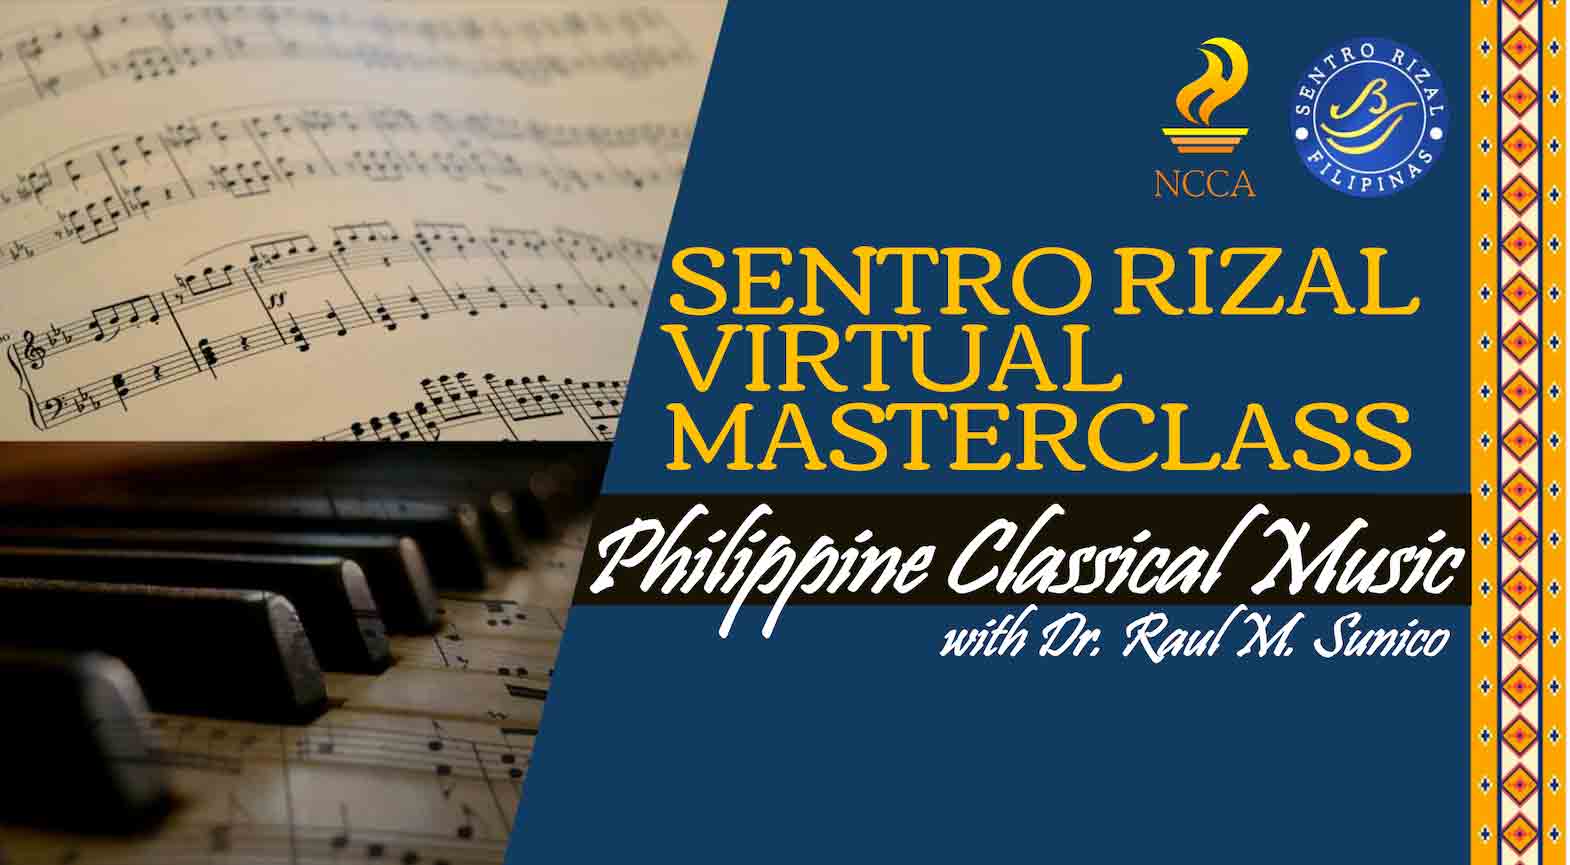 Sentro Rizal offers free virtual master classes led by top PH artists